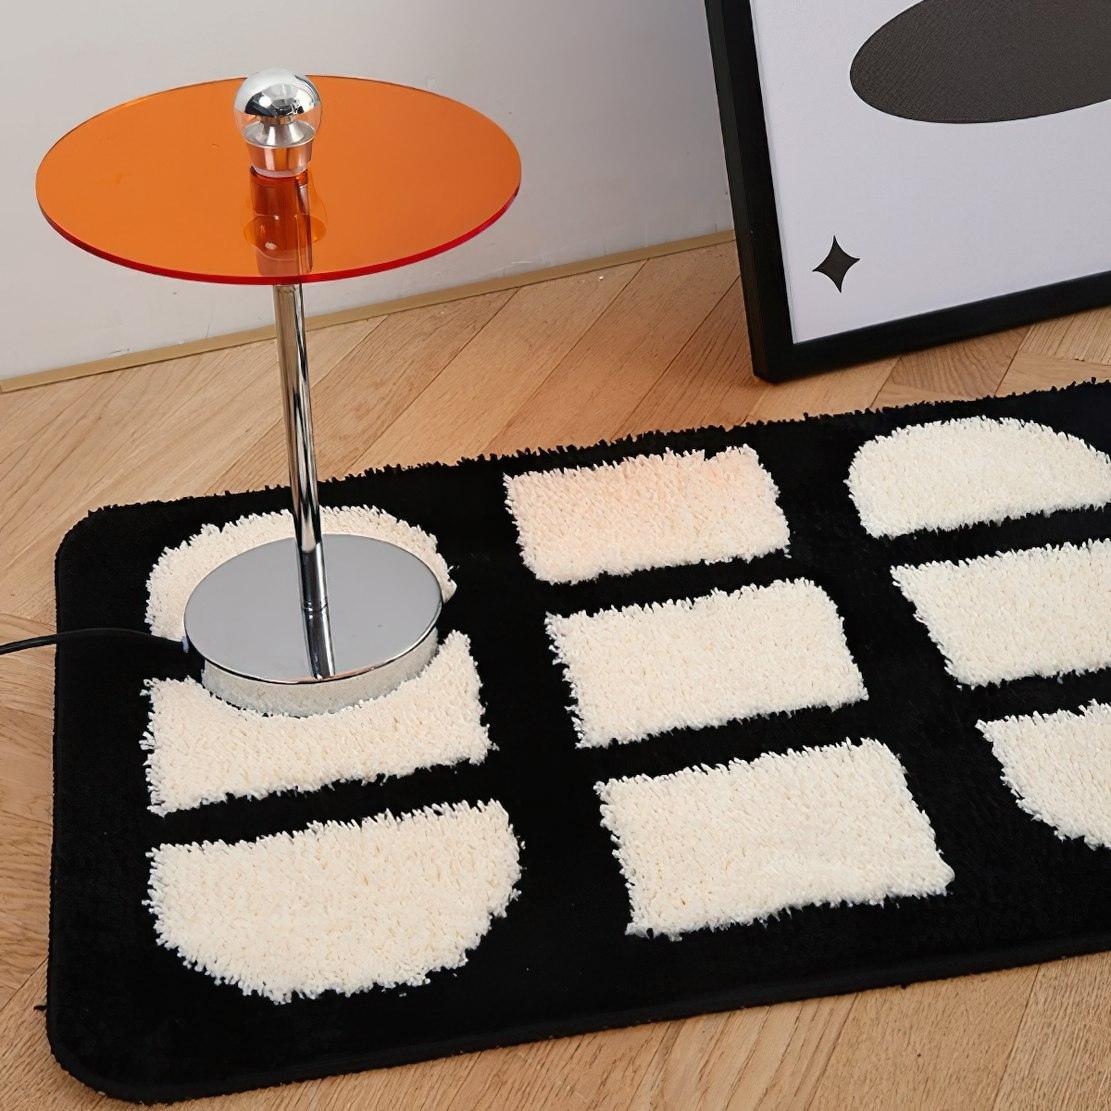 Black and white patterned rug with orange table lamp